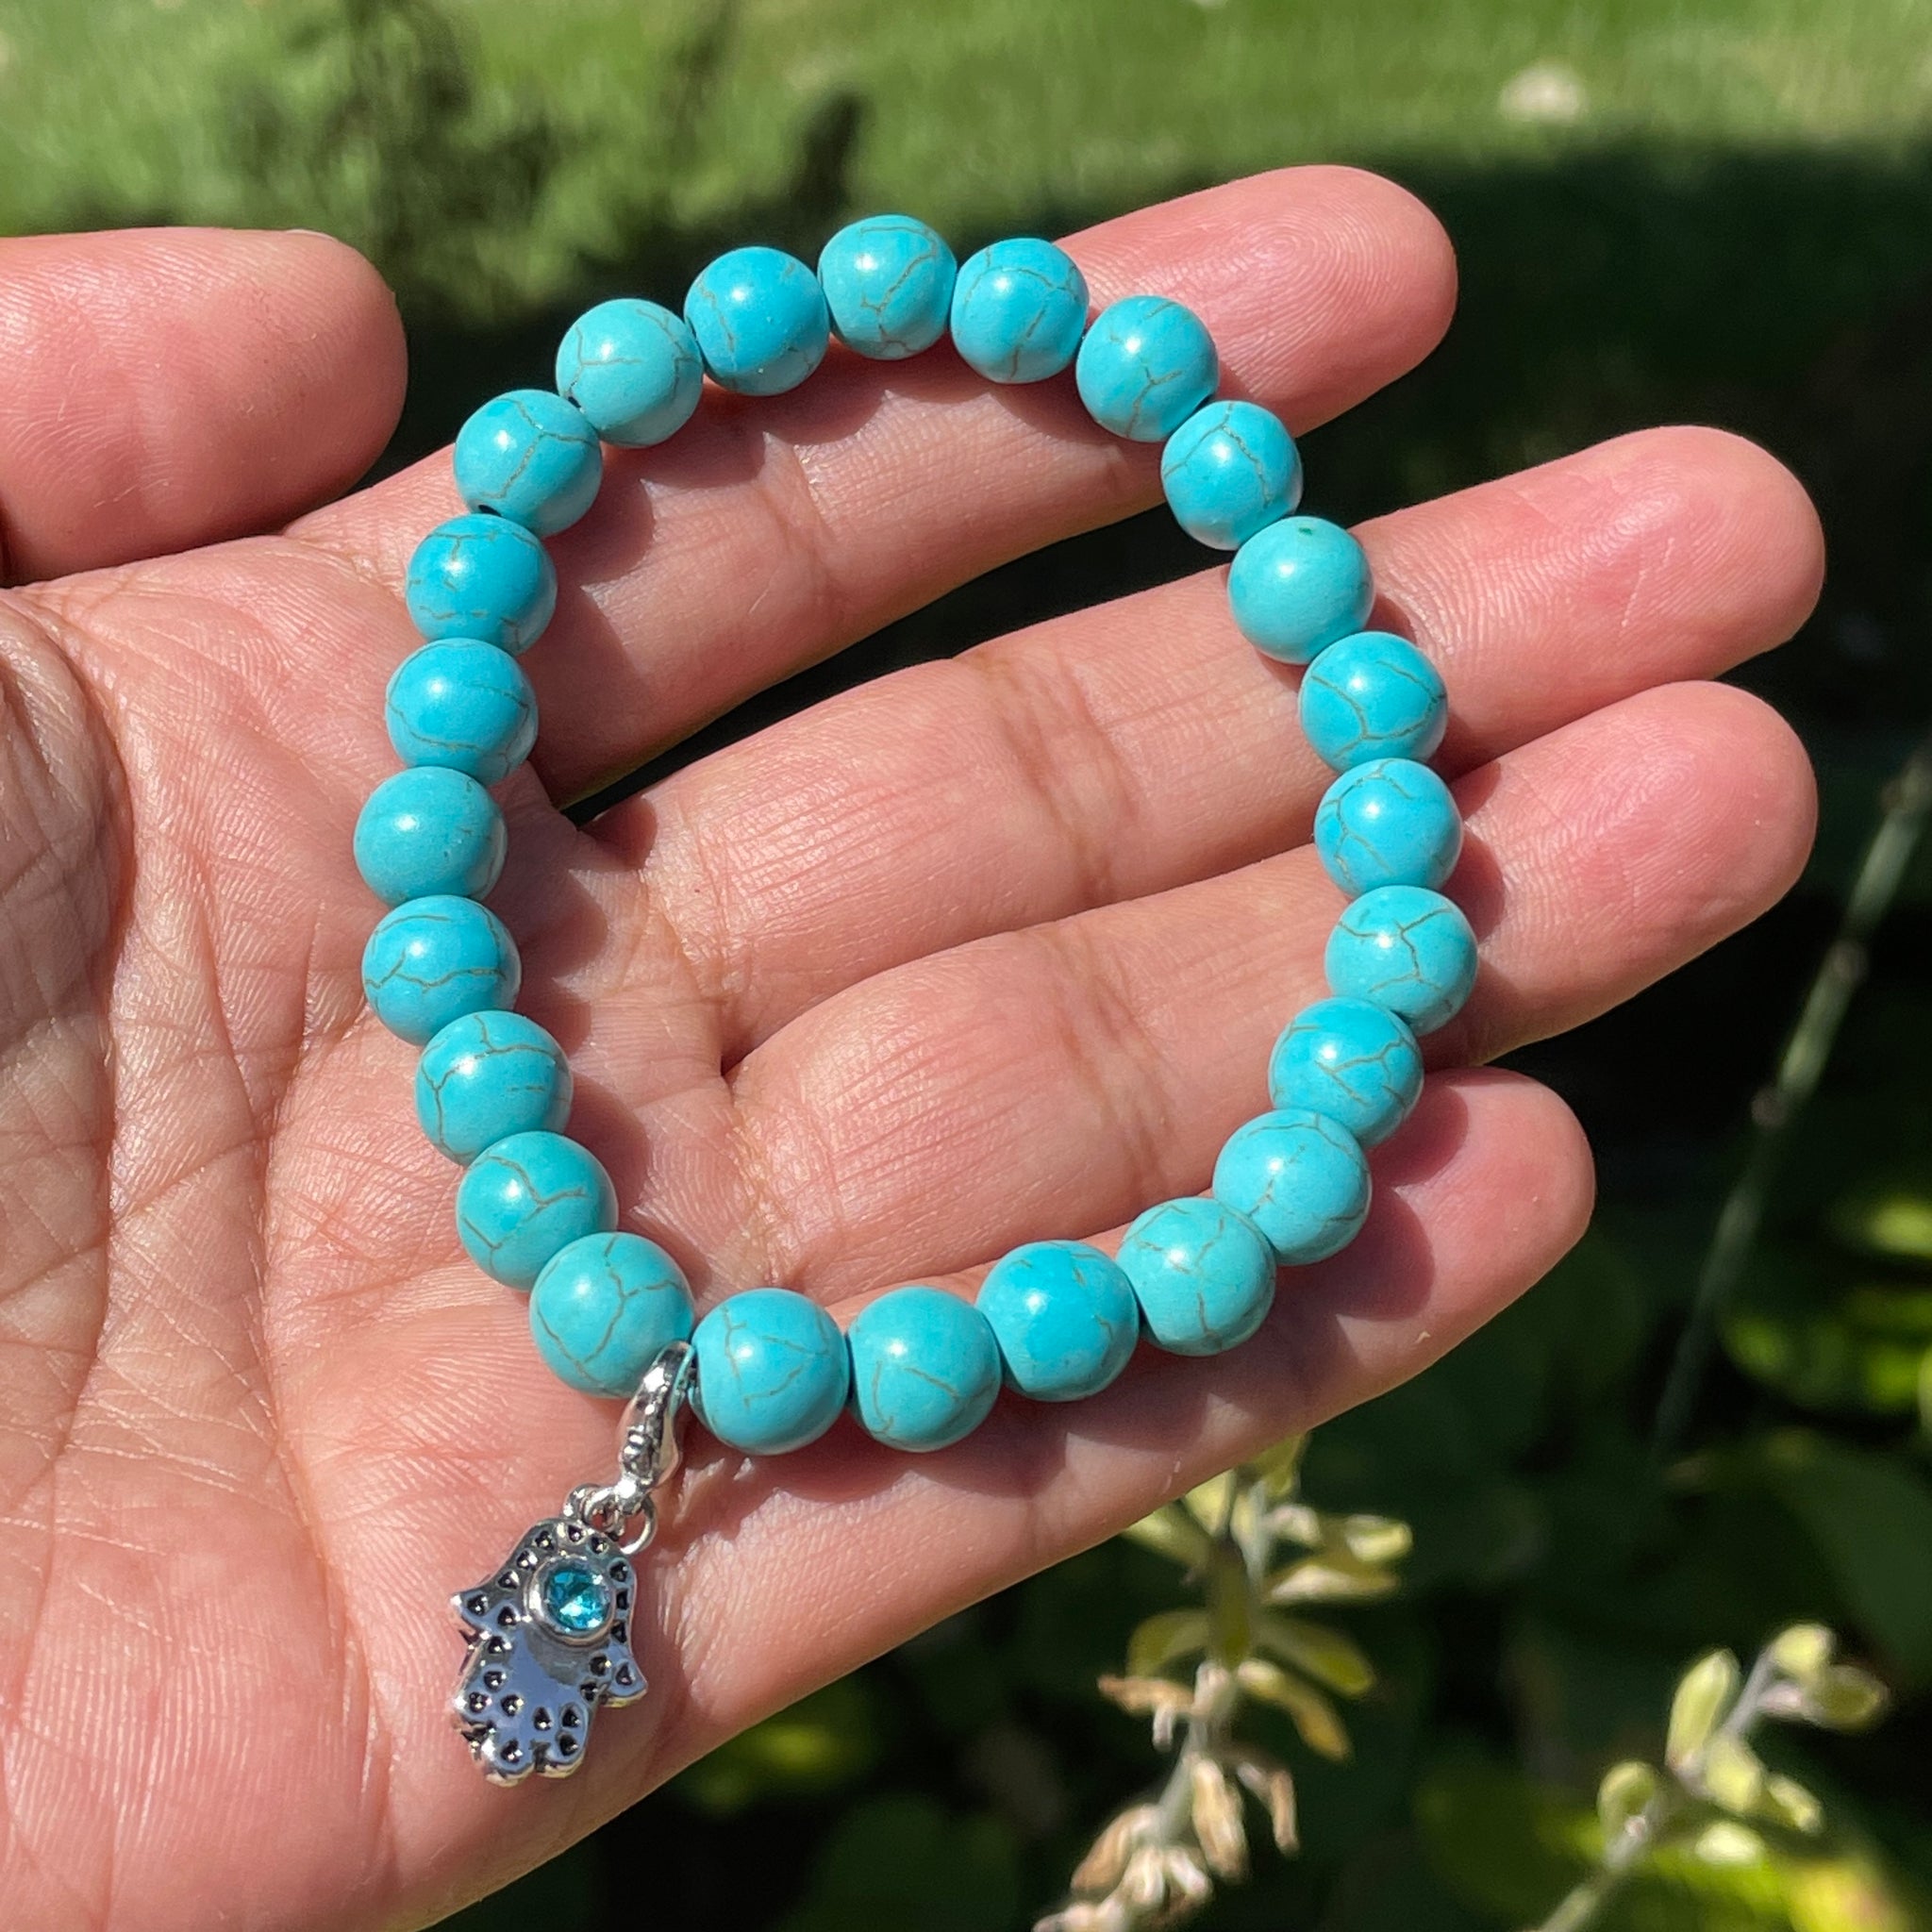 Turquoise Bracelet with Hamsa Hand Charm (8mm) | FREE SHIPPING